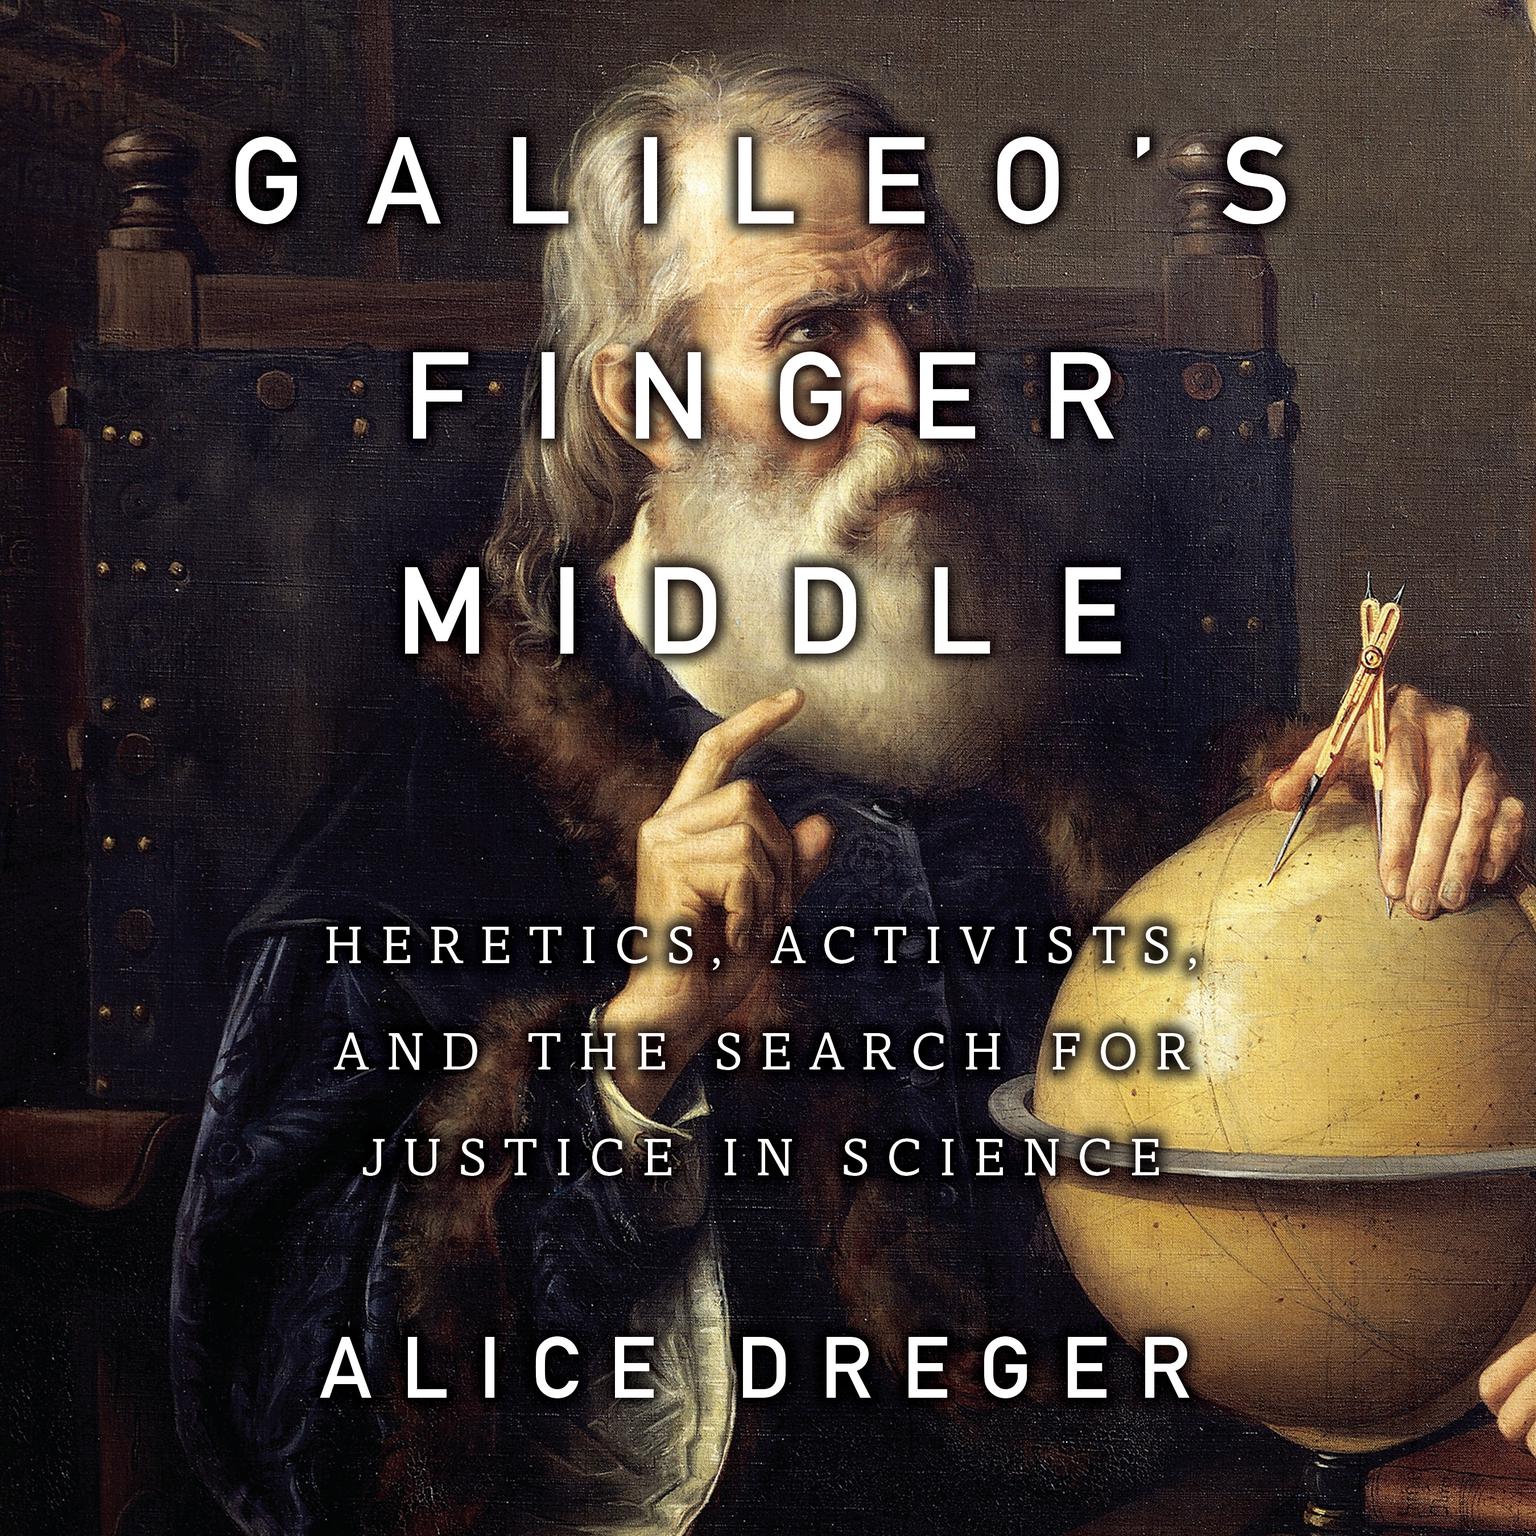 Galileos Middle Finger: Heretics, Activists, and the Search for Justice in Science Audiobook, by Alice Dreger